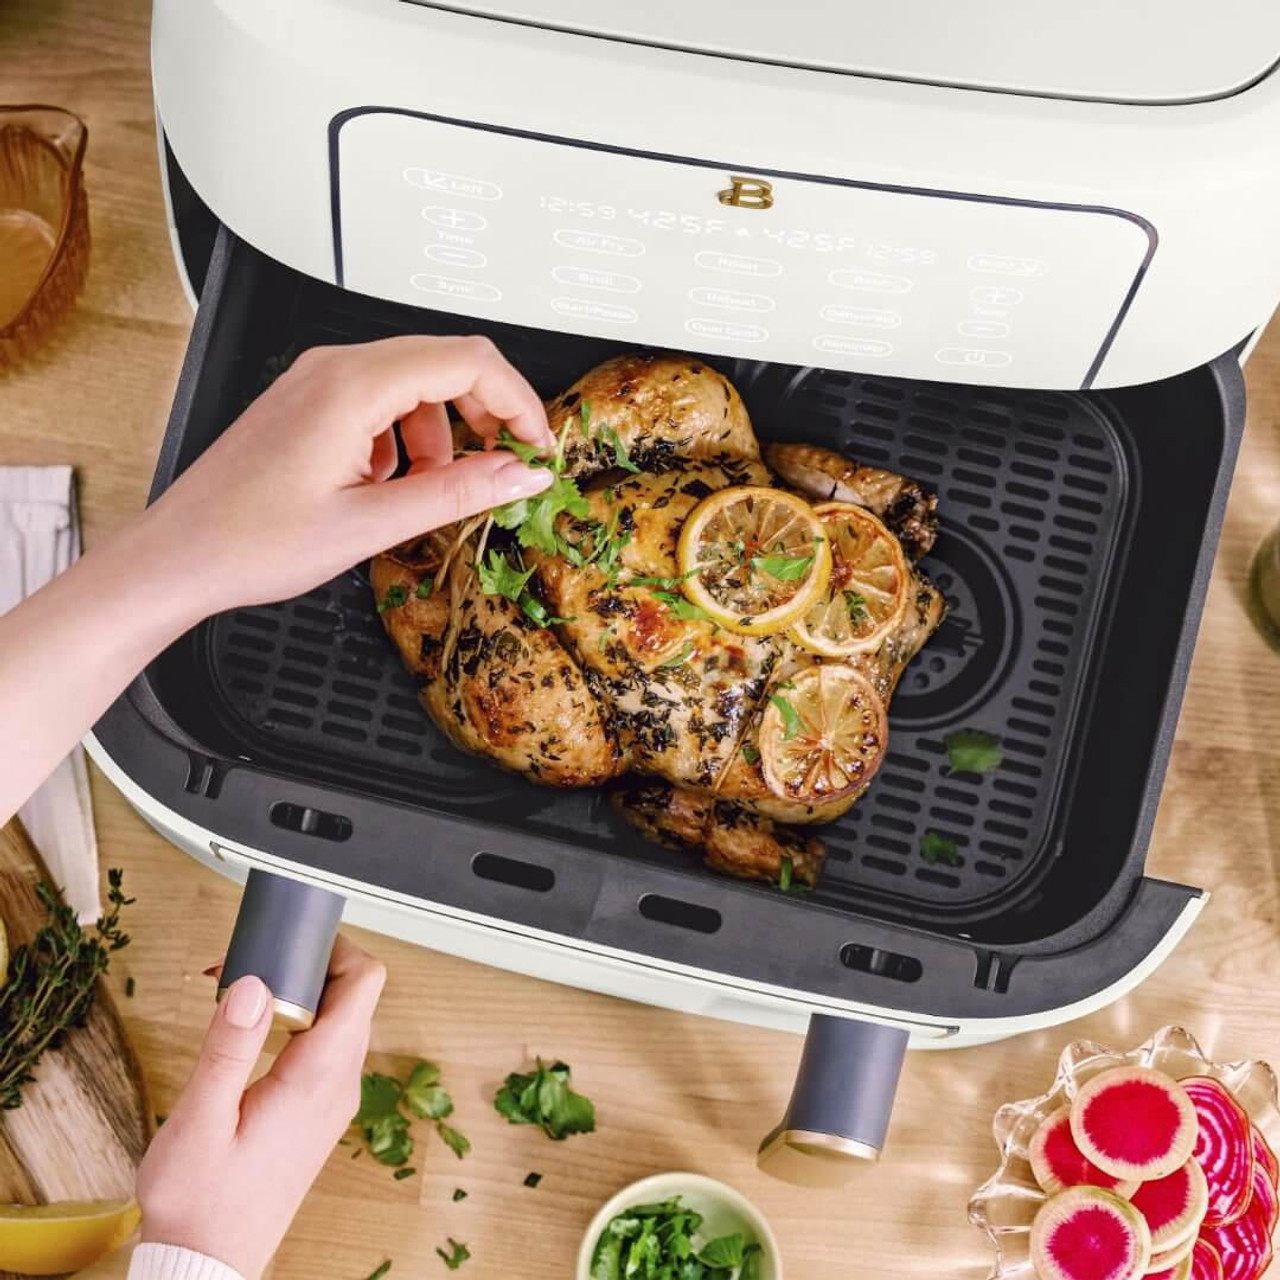 https://cdn11.bigcommerce.com/s-g5ygv2at8j/images/stencil/1280x1280/products/14017/29834/beautiful-9qt-trizone-air-fryer-by-drew-barrymore__02163.1688348709.jpg?c=1